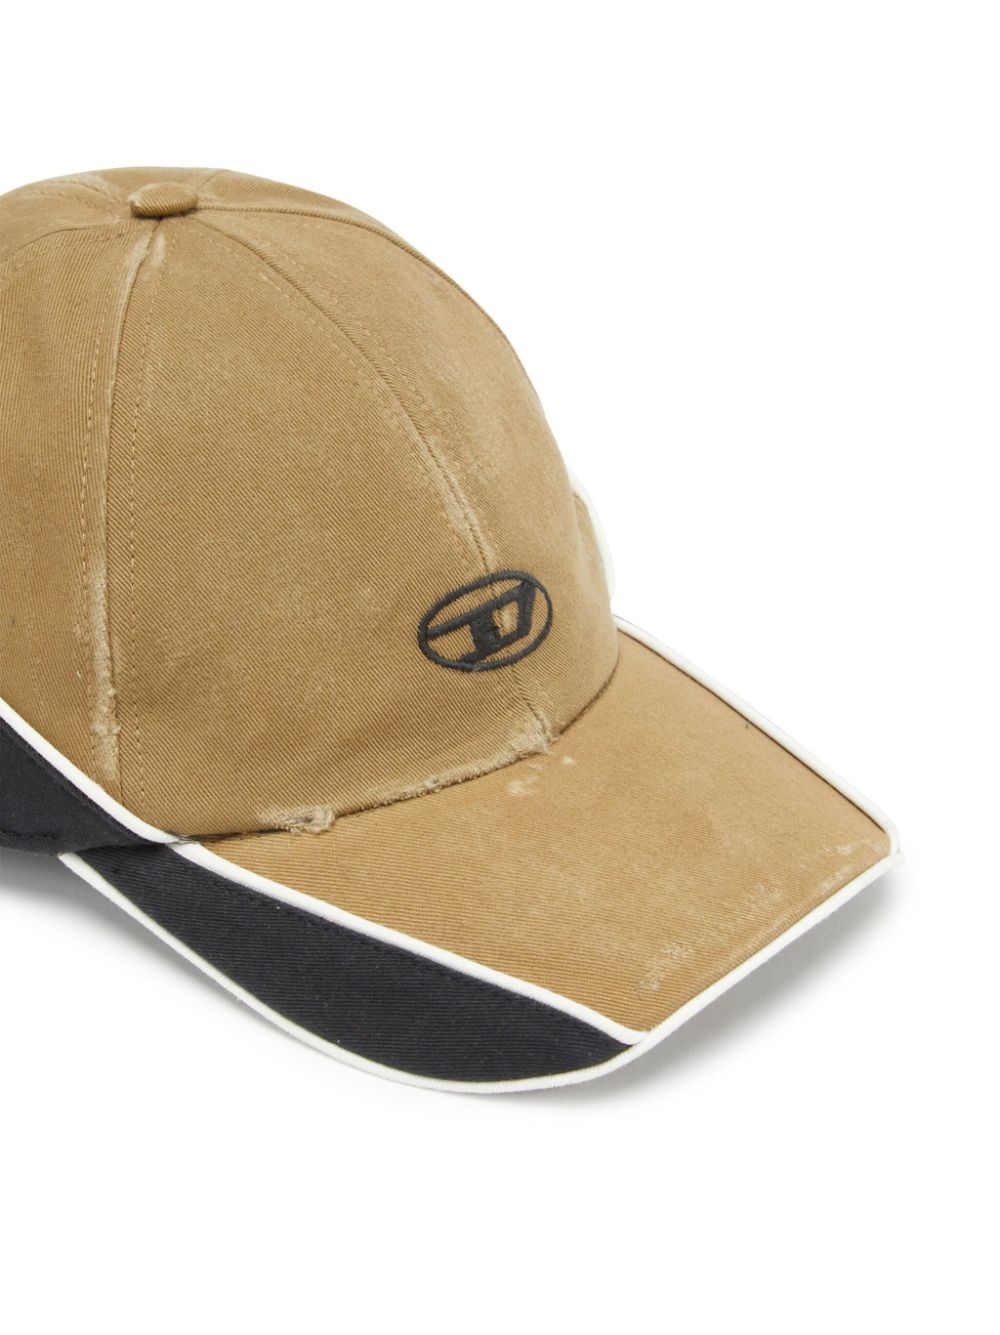 C-DALE logo-embroidered cap - 3